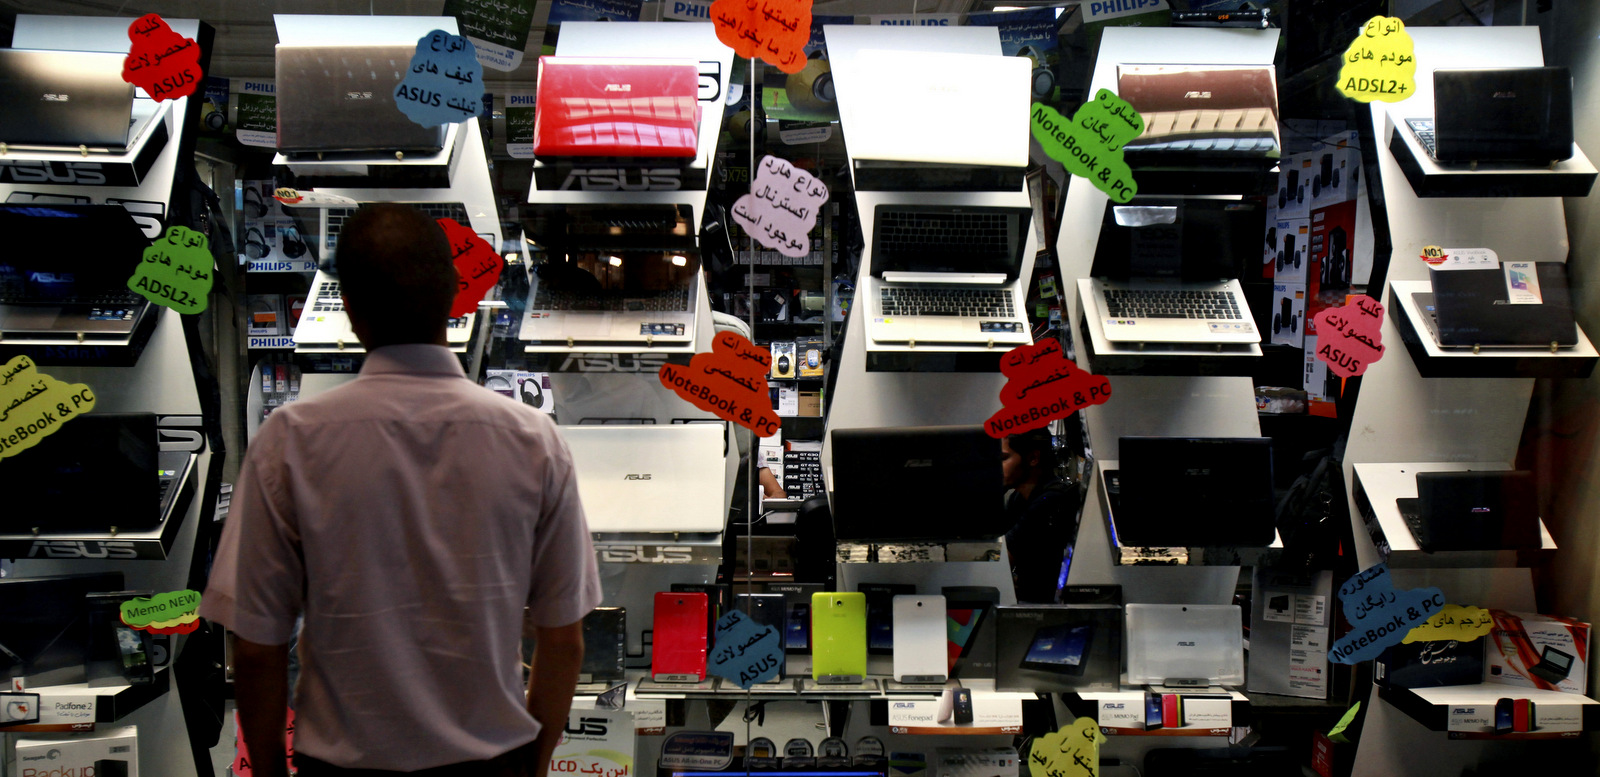 A young Iranian man browses a display of laptop computers for sale at a shop in Tehran, Iran. (AP/Ebrahim Noroozi)